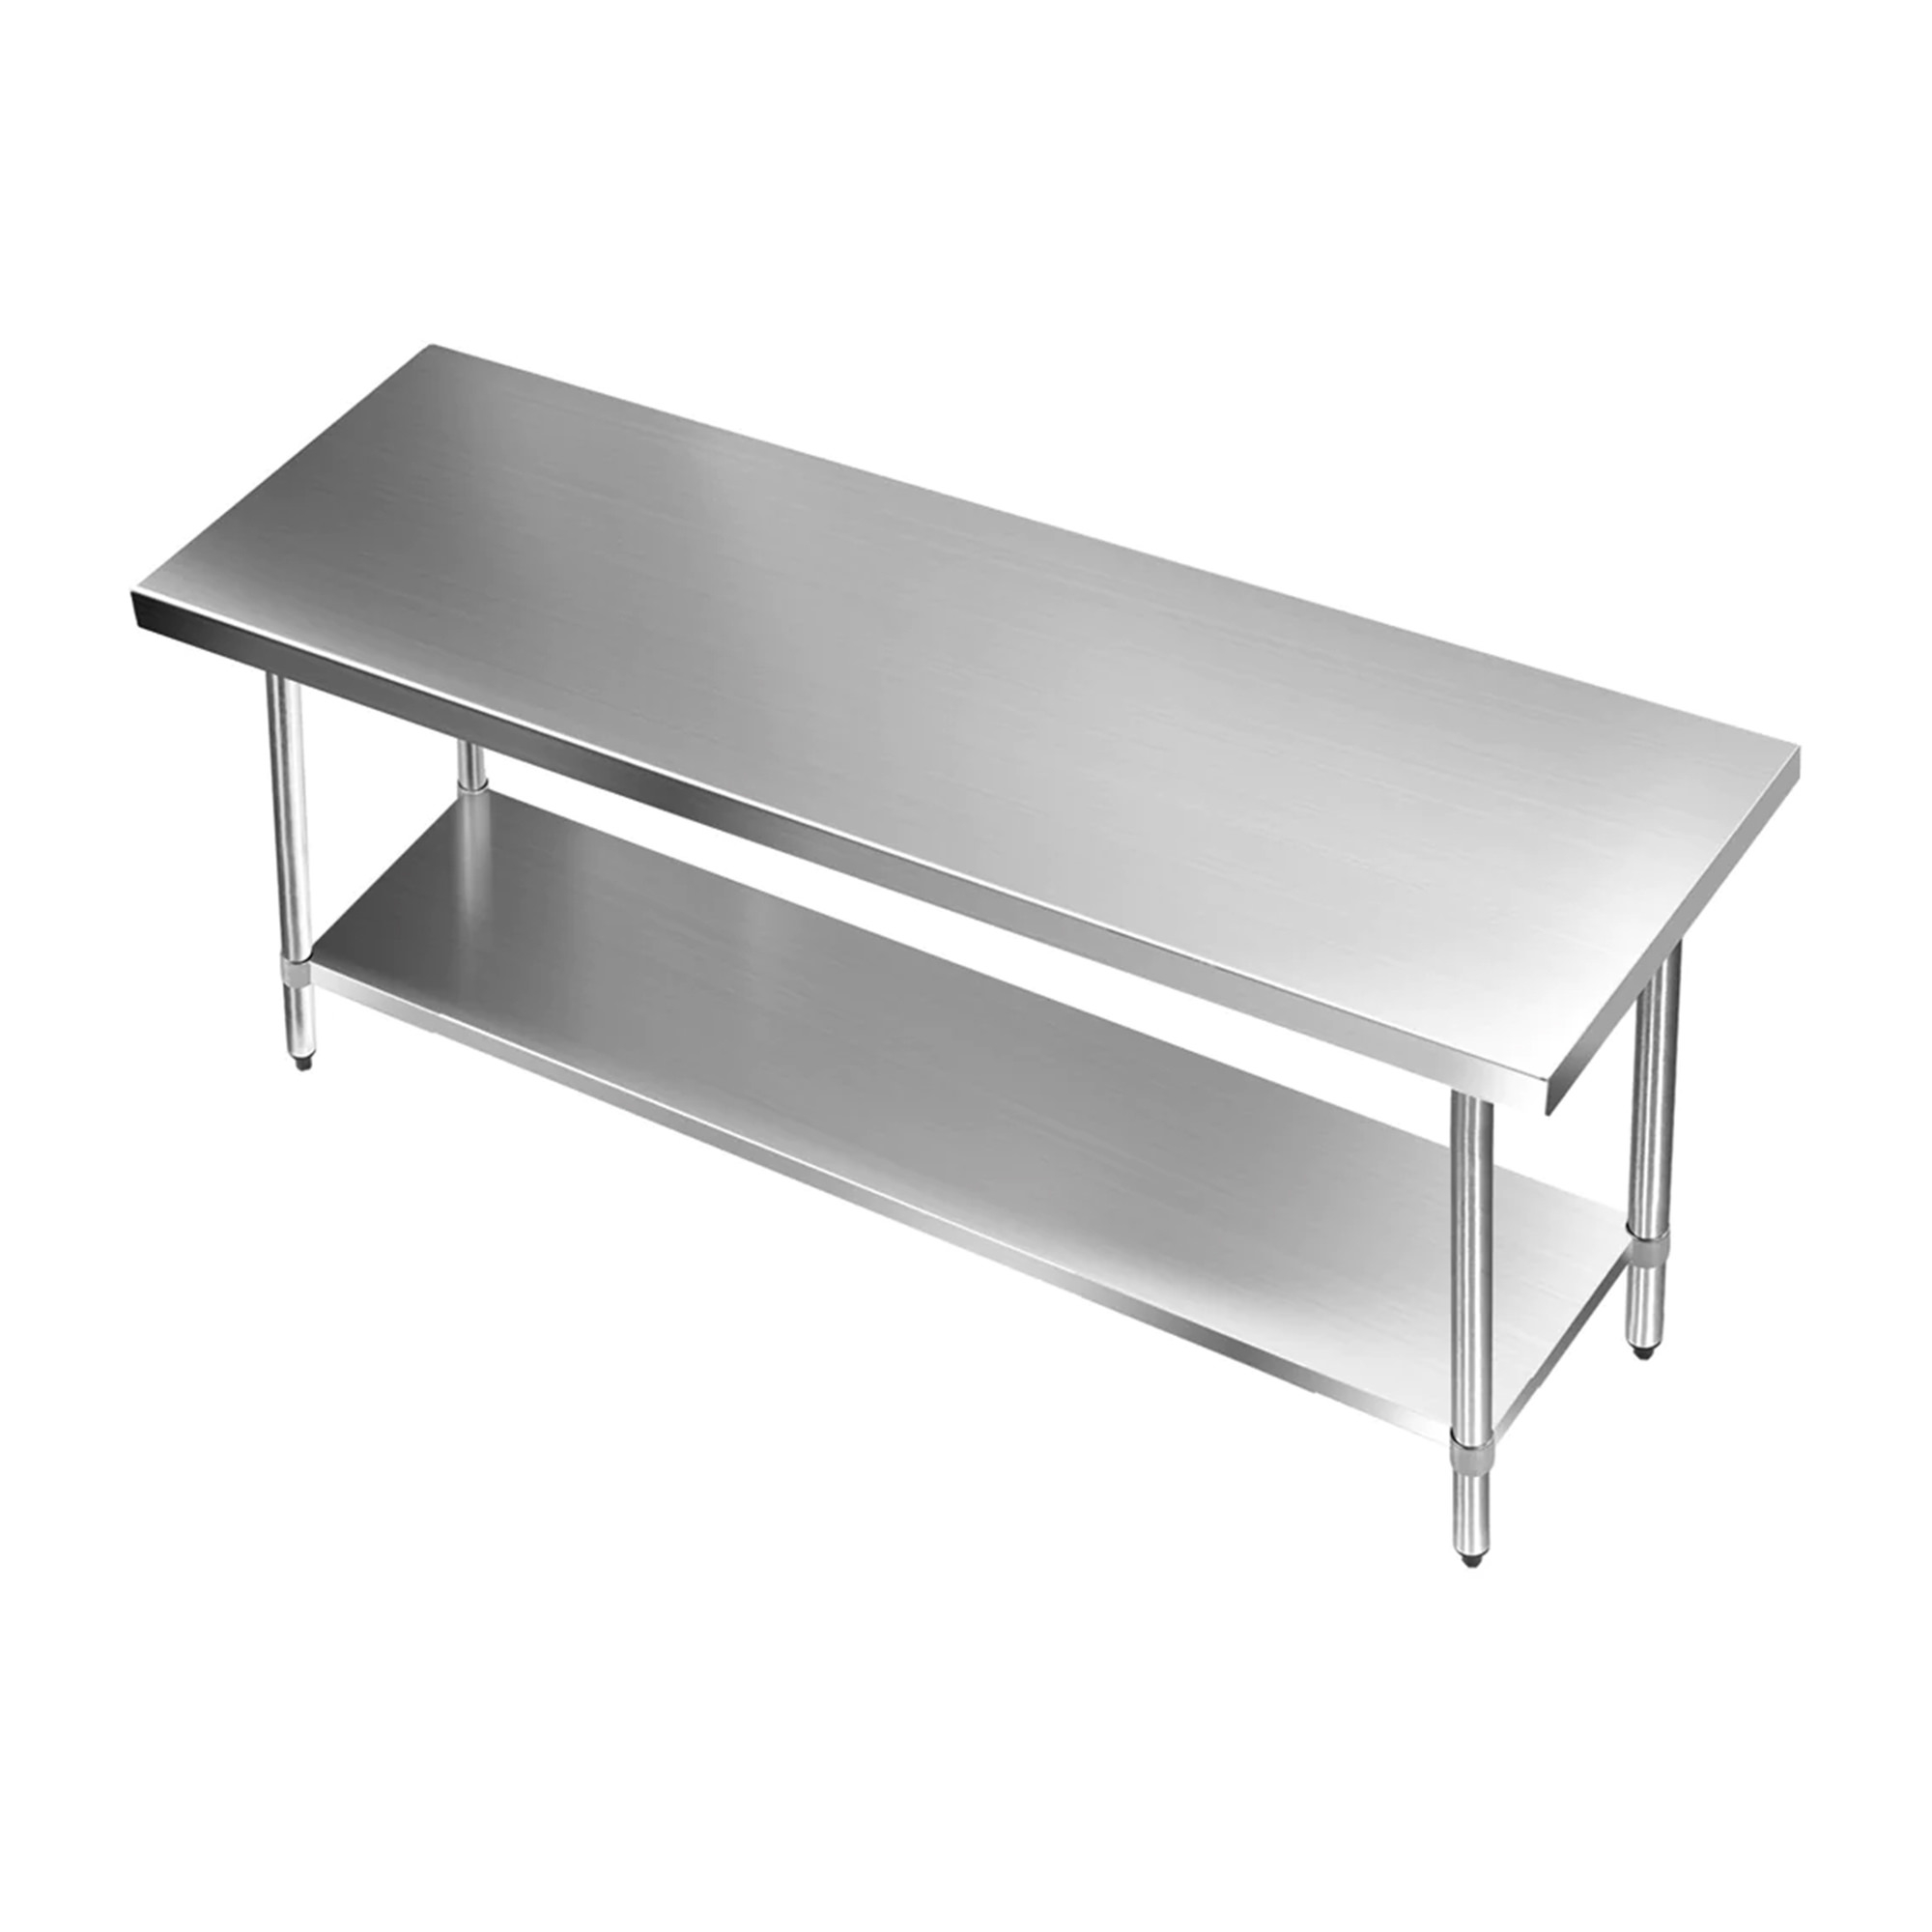 Cefito 430 Stainless Steel Kitchen Bench 182.9x76.2cm Image 2